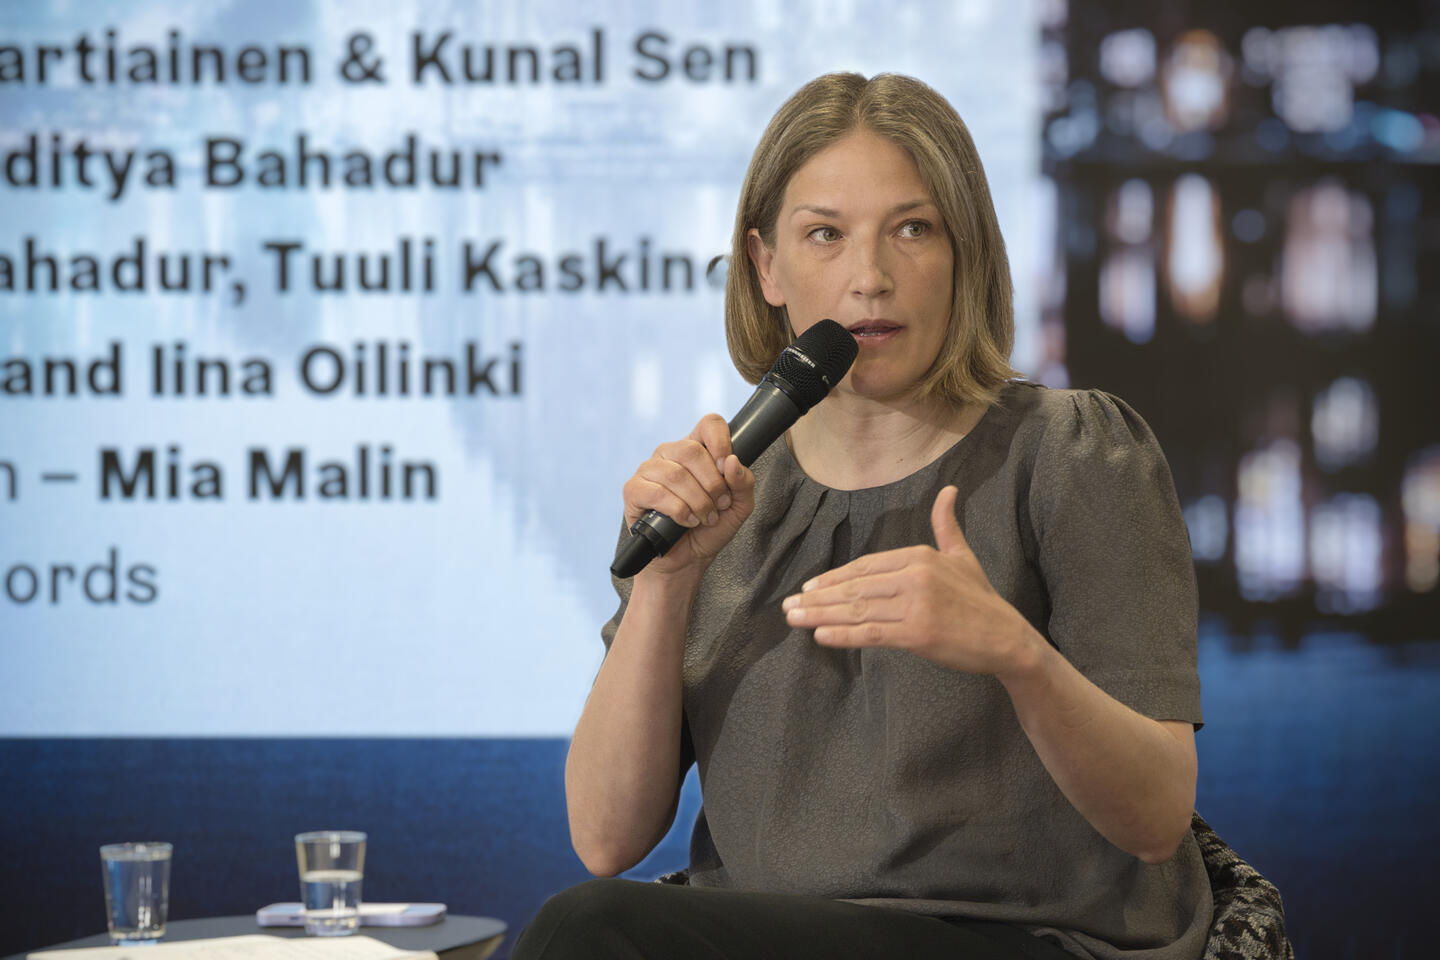 Tuuli Kaskinen at the Sustainable cities discussion forum, May 2023. Photo: Ilkka Ranta-aho